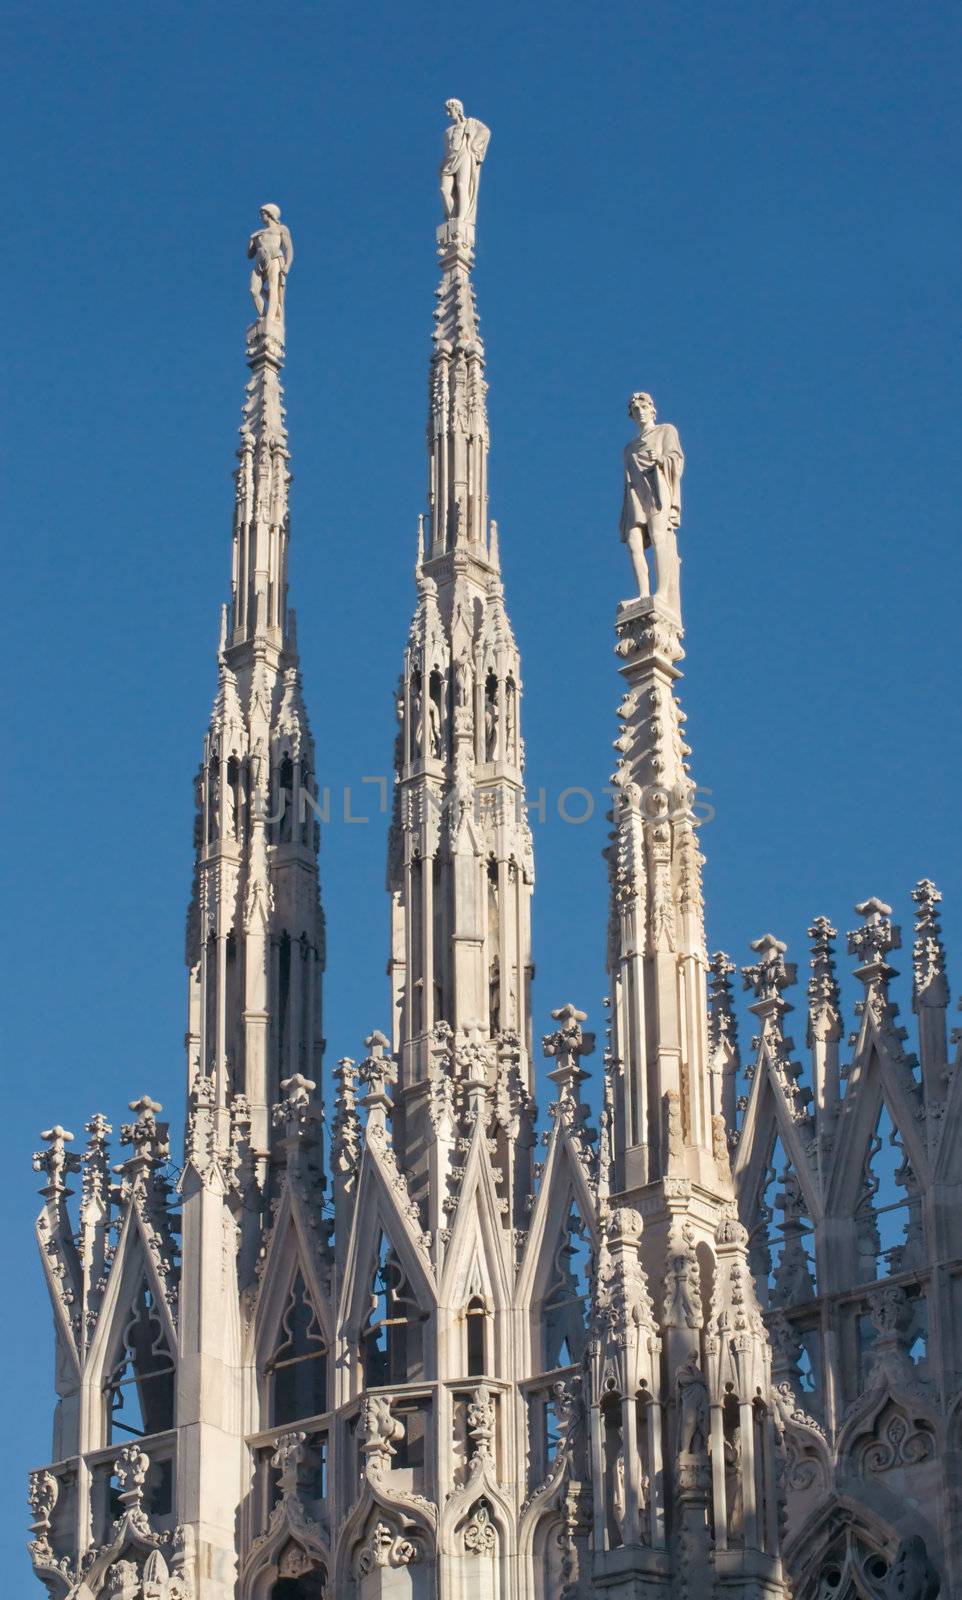 Statues of the Duomo in Milan on a winter evening